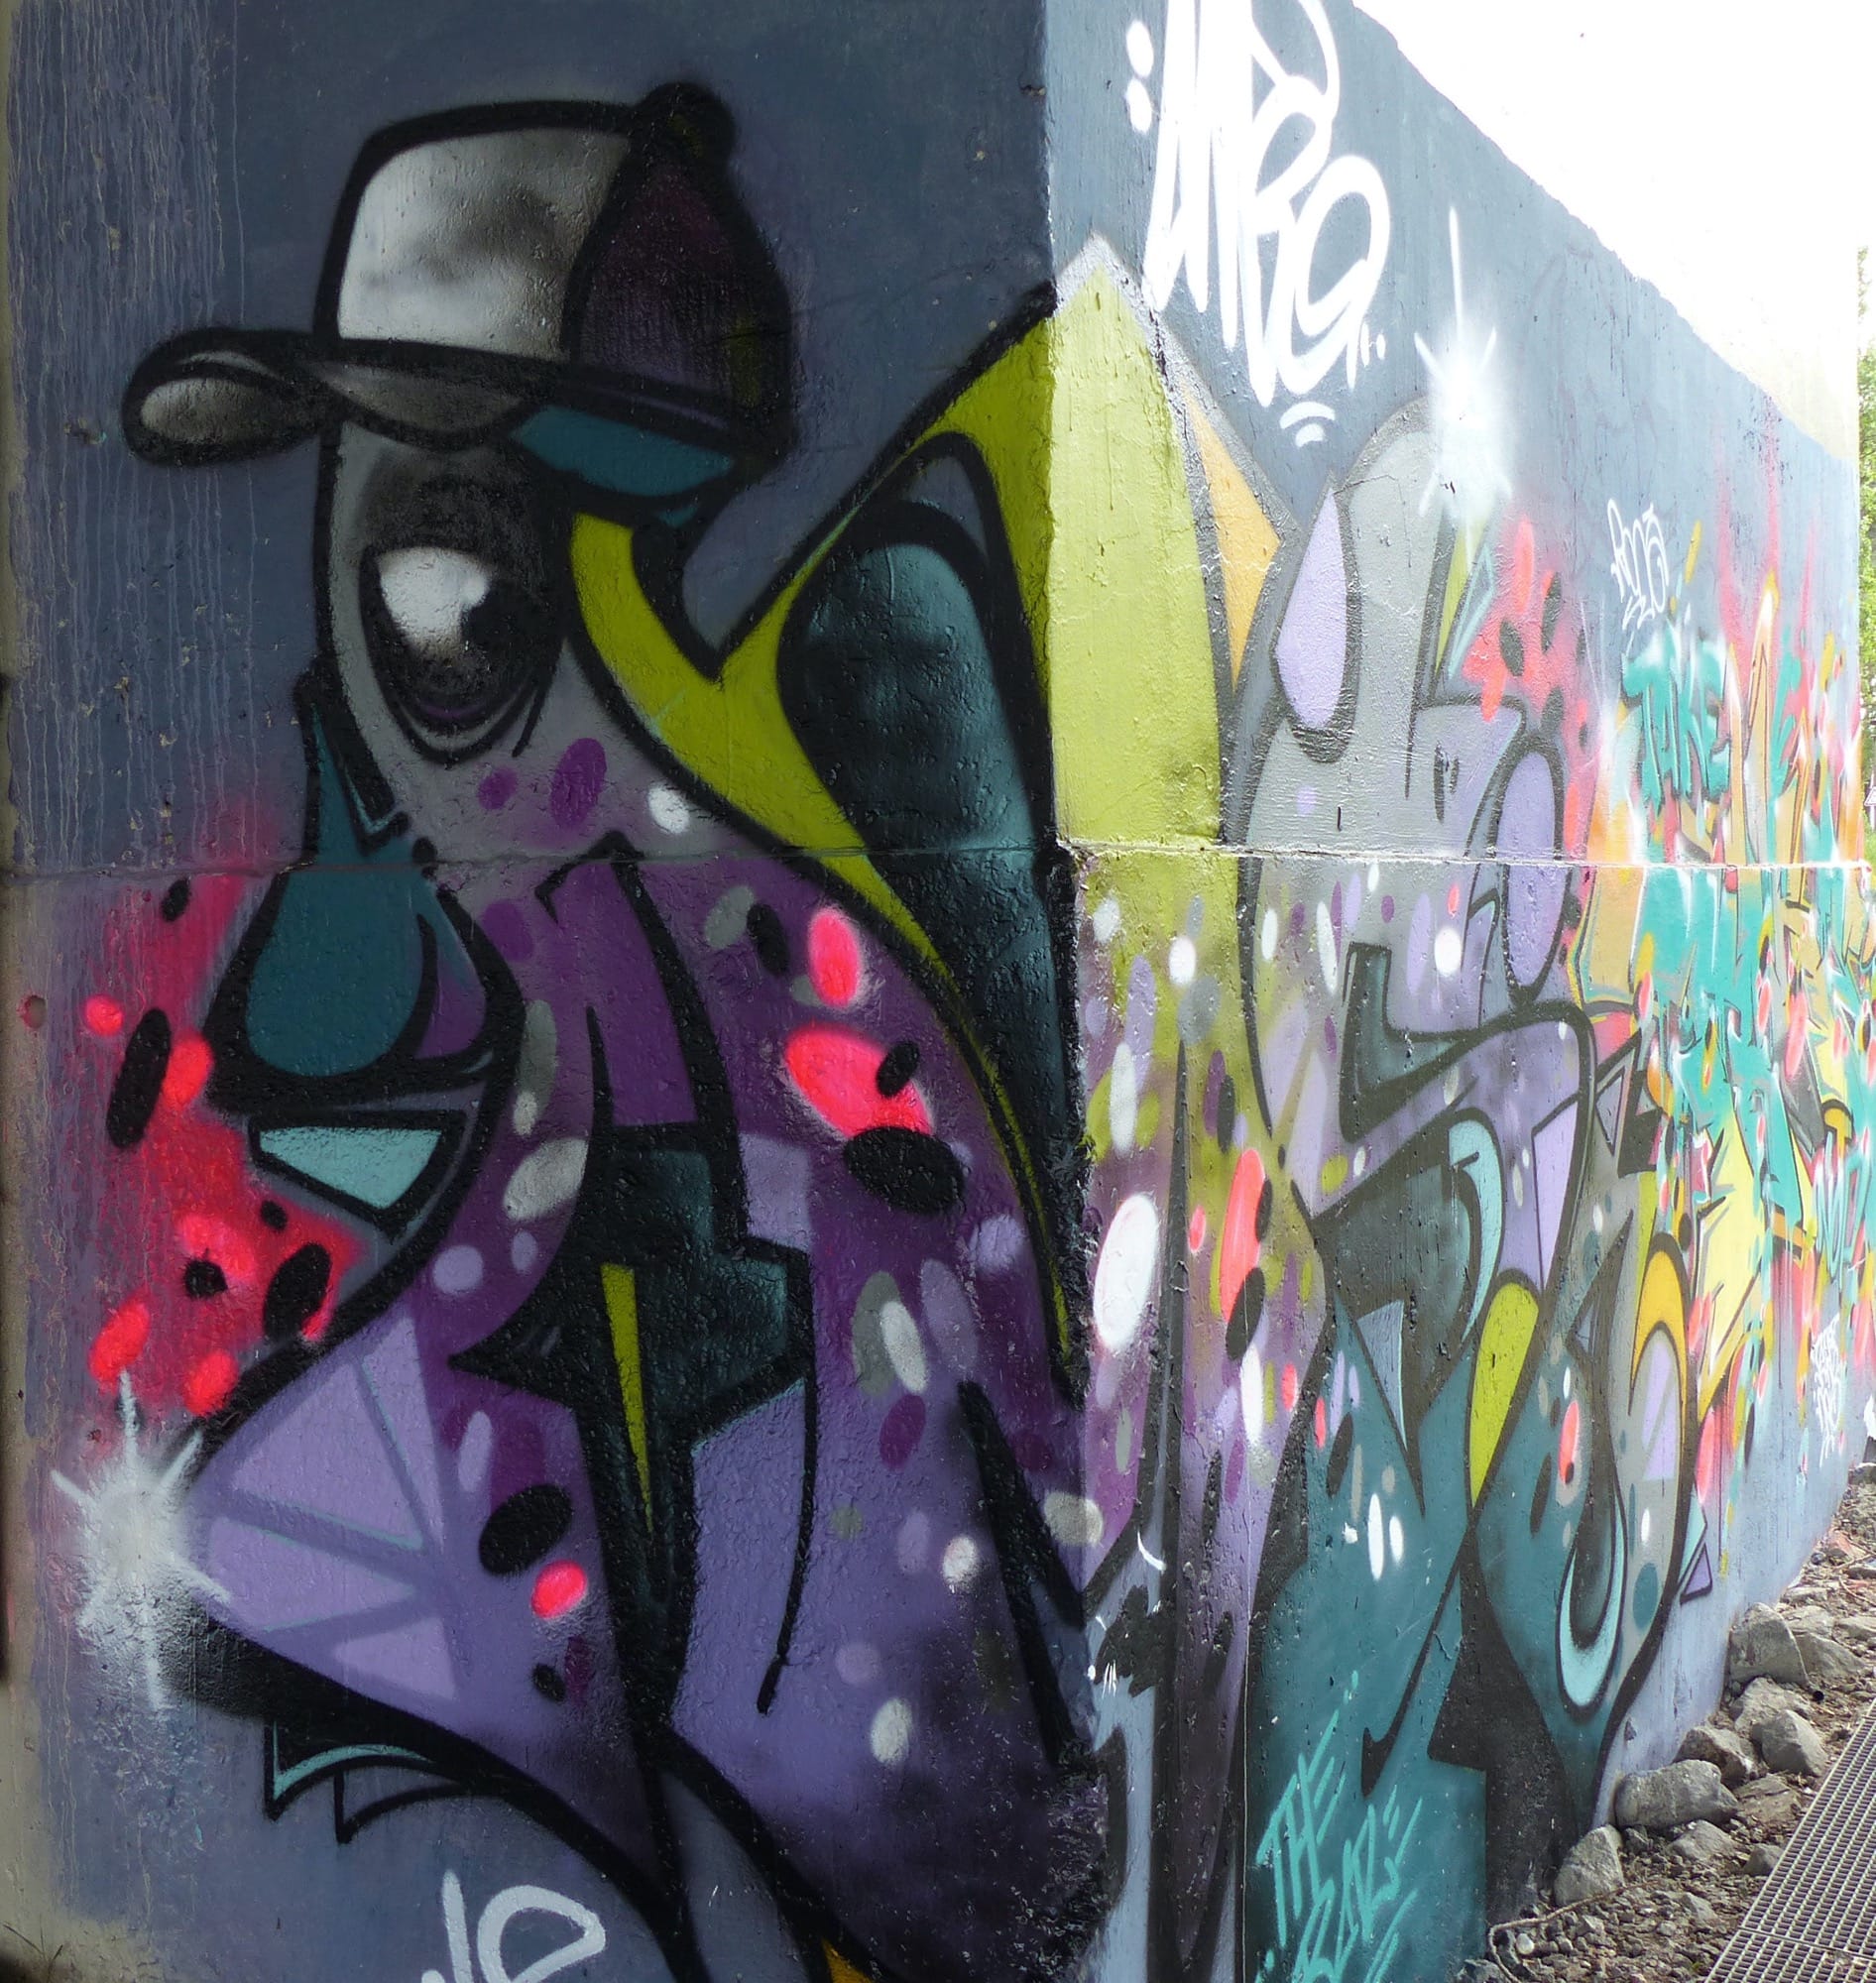 Graffiti 80  captured by Rabot in Nantes France